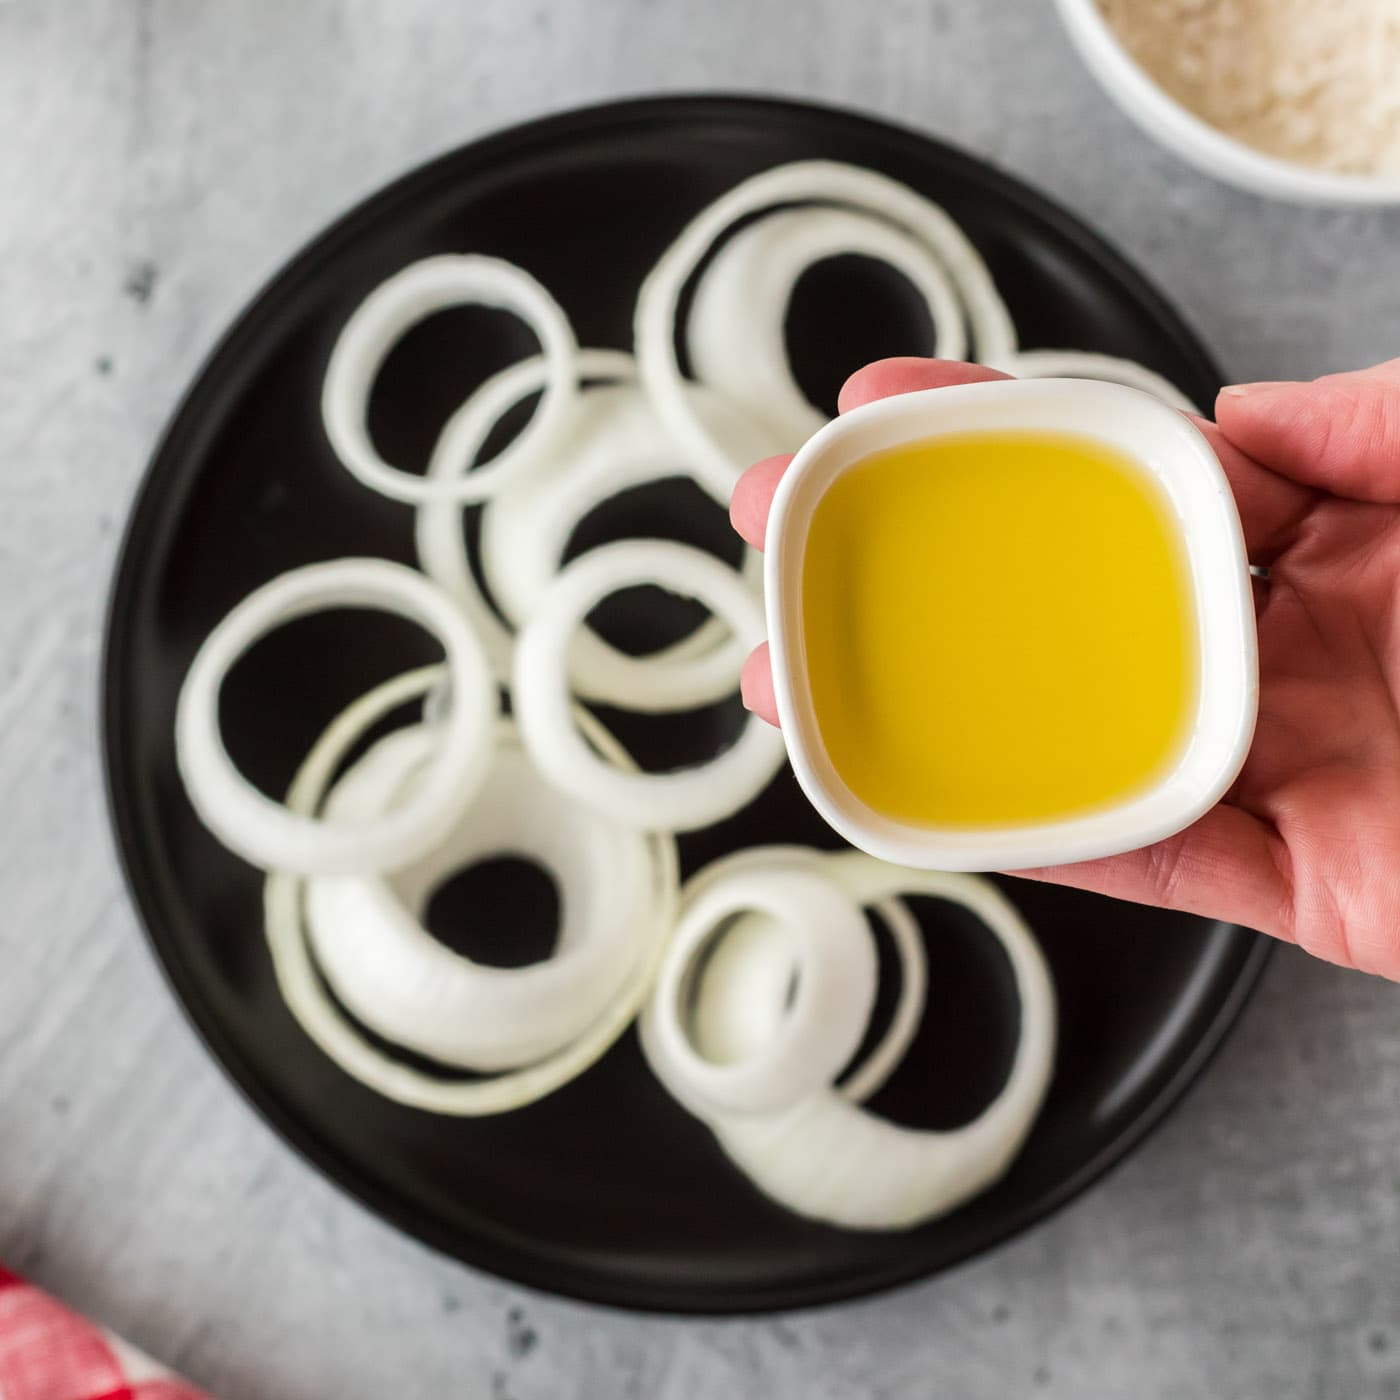 olive oil over onion rings